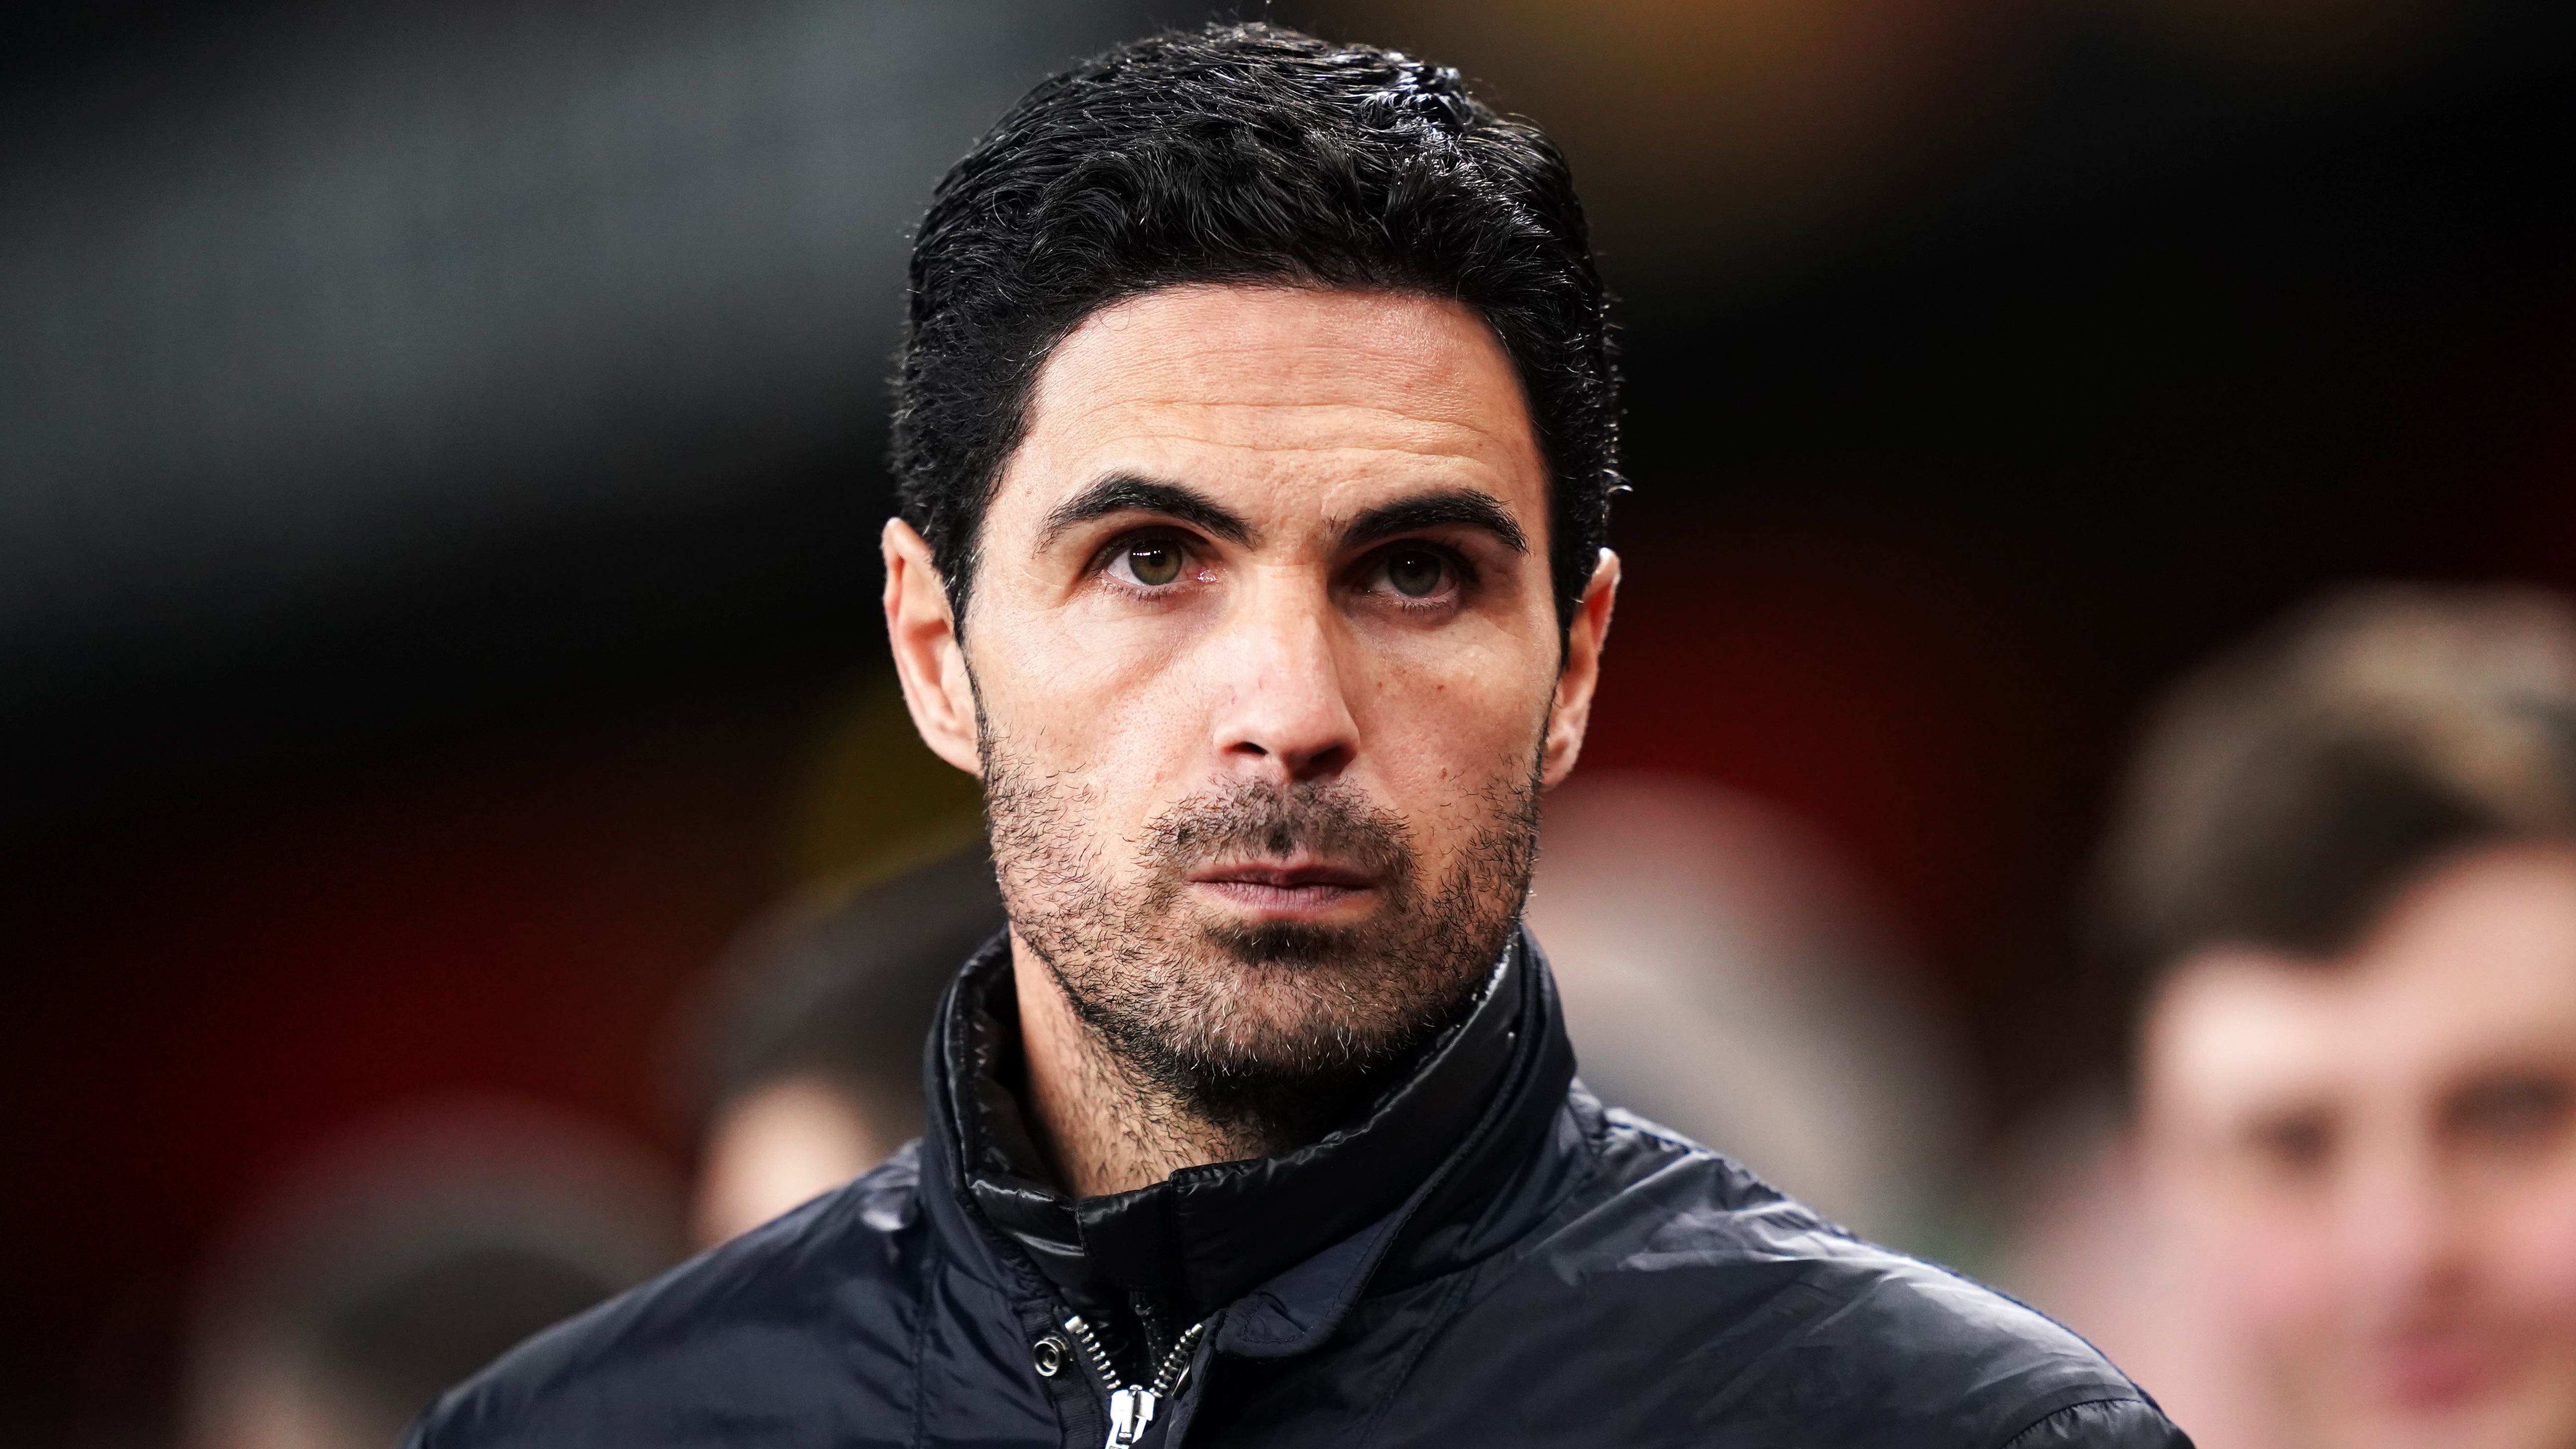 Mikel Arteta given more power over Arsenal transfers after Raul